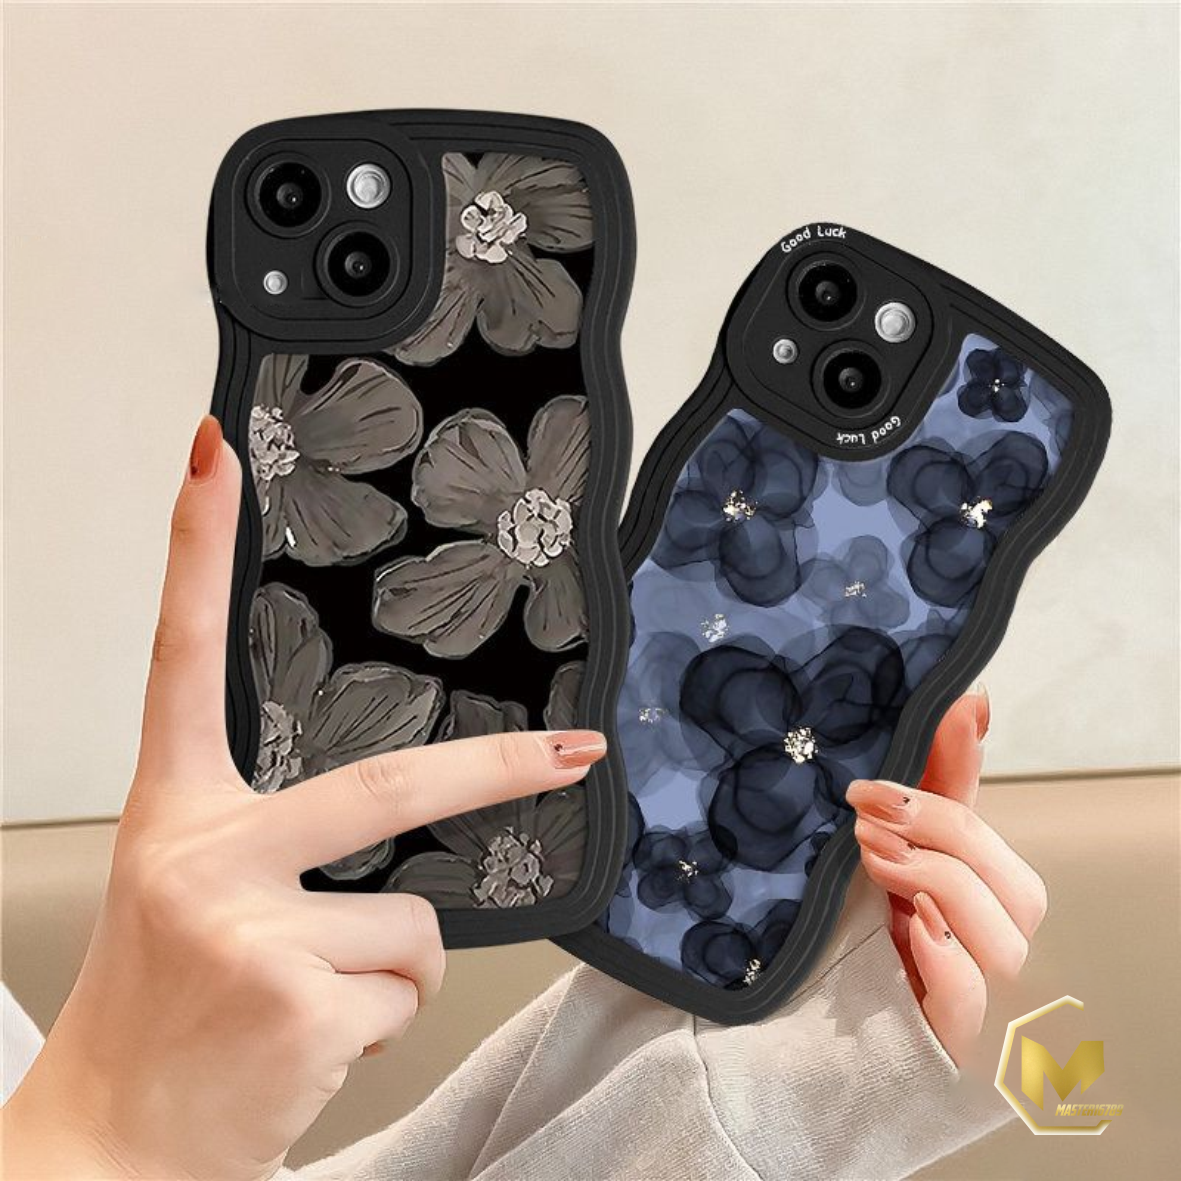 SS820 CASE SILIKON CASING OIL PAINTING FLOWER FOR OPPO A16K A16E A78 A3S C1 A1K C2 A5S A7 A11K A12 A15 A15S A16 A16S A17 A17K A31 A8 A9 A5 A36 A76 A96 A37 NEO 9 A39 A57 A52 A92 A53 A33 A54 A55 A57 2022 A77S A58 A78 MA4458